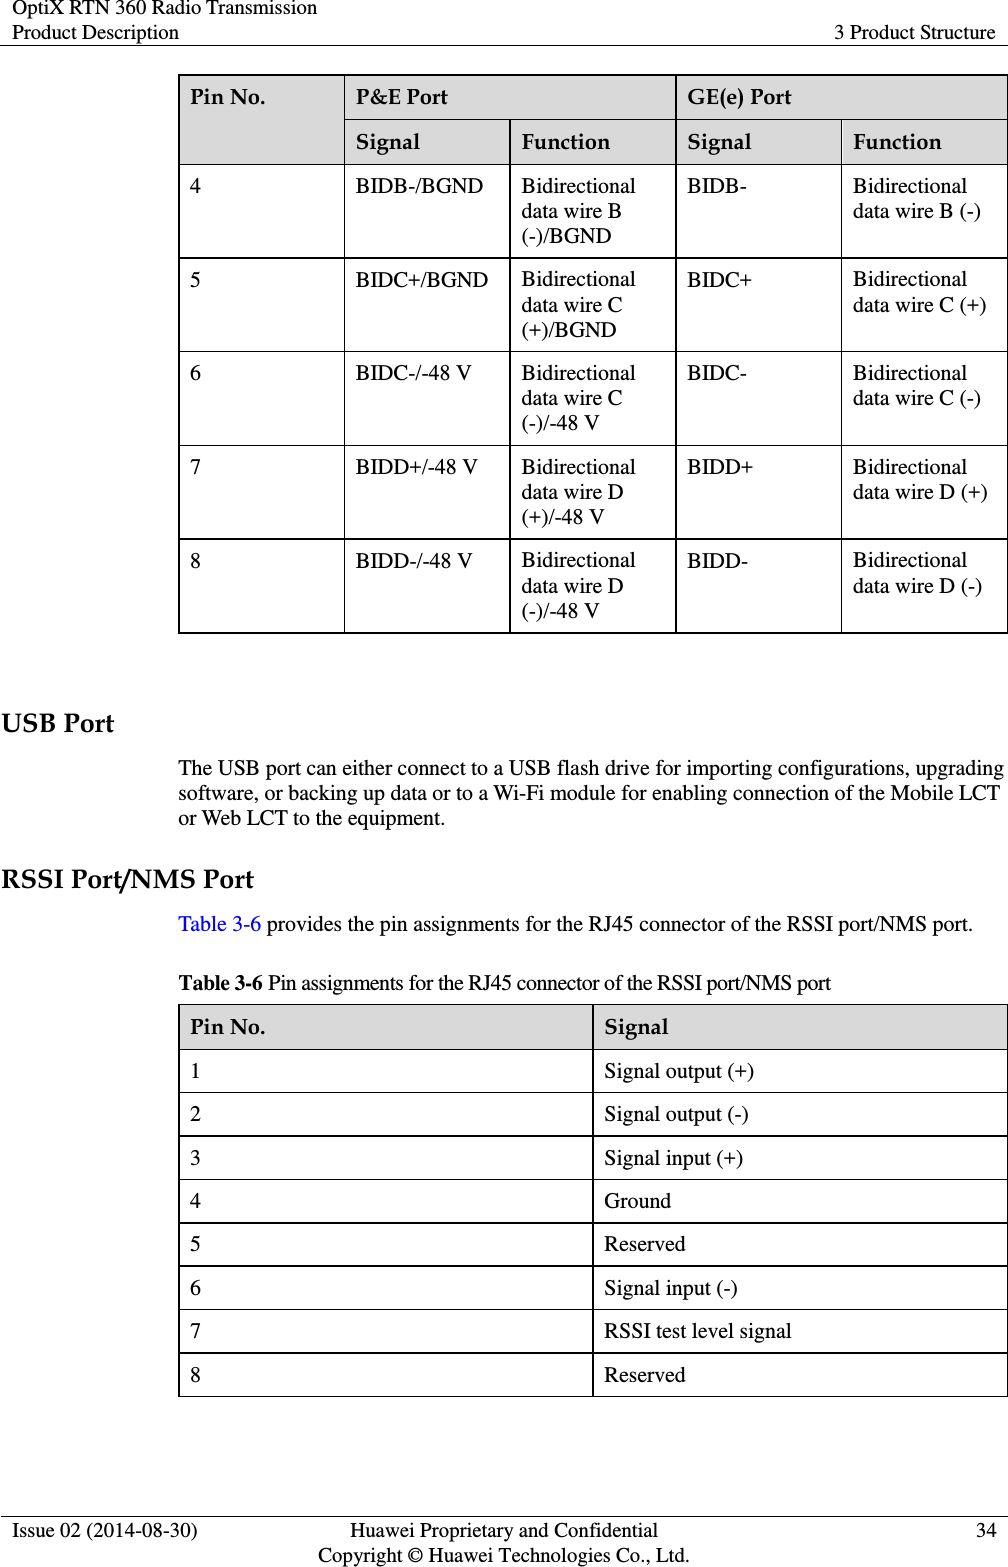 OptiX RTN 360 Radio Transmission Product Description 3 Product Structure  Issue 02 (2014-08-30) Huawei Proprietary and Confidential                                     Copyright © Huawei Technologies Co., Ltd. 34  Pin No. P&amp;E Port GE(e) Port Signal Function Signal Function 4 BIDB-/BGND Bidirectional data wire B (-)/BGND BIDB- Bidirectional data wire B (-) 5 BIDC+/BGND Bidirectional data wire C (+)/BGND BIDC+ Bidirectional data wire C (+) 6 BIDC-/-48 V Bidirectional data wire C (-)/-48 V BIDC- Bidirectional data wire C (-) 7 BIDD+/-48 V Bidirectional data wire D (+)/-48 V BIDD+ Bidirectional data wire D (+) 8 BIDD-/-48 V Bidirectional data wire D (-)/-48 V BIDD- Bidirectional data wire D (-)  USB Port The USB port can either connect to a USB flash drive for importing configurations, upgrading software, or backing up data or to a Wi-Fi module for enabling connection of the Mobile LCT or Web LCT to the equipment. RSSI Port/NMS Port Table 3-6 provides the pin assignments for the RJ45 connector of the RSSI port/NMS port. Table 3-6 Pin assignments for the RJ45 connector of the RSSI port/NMS port Pin No. Signal 1 Signal output (+)   2 Signal output (-) 3 Signal input (+)   4 Ground 5 Reserved 6 Signal input (-) 7 RSSI test level signal 8 Reserved  